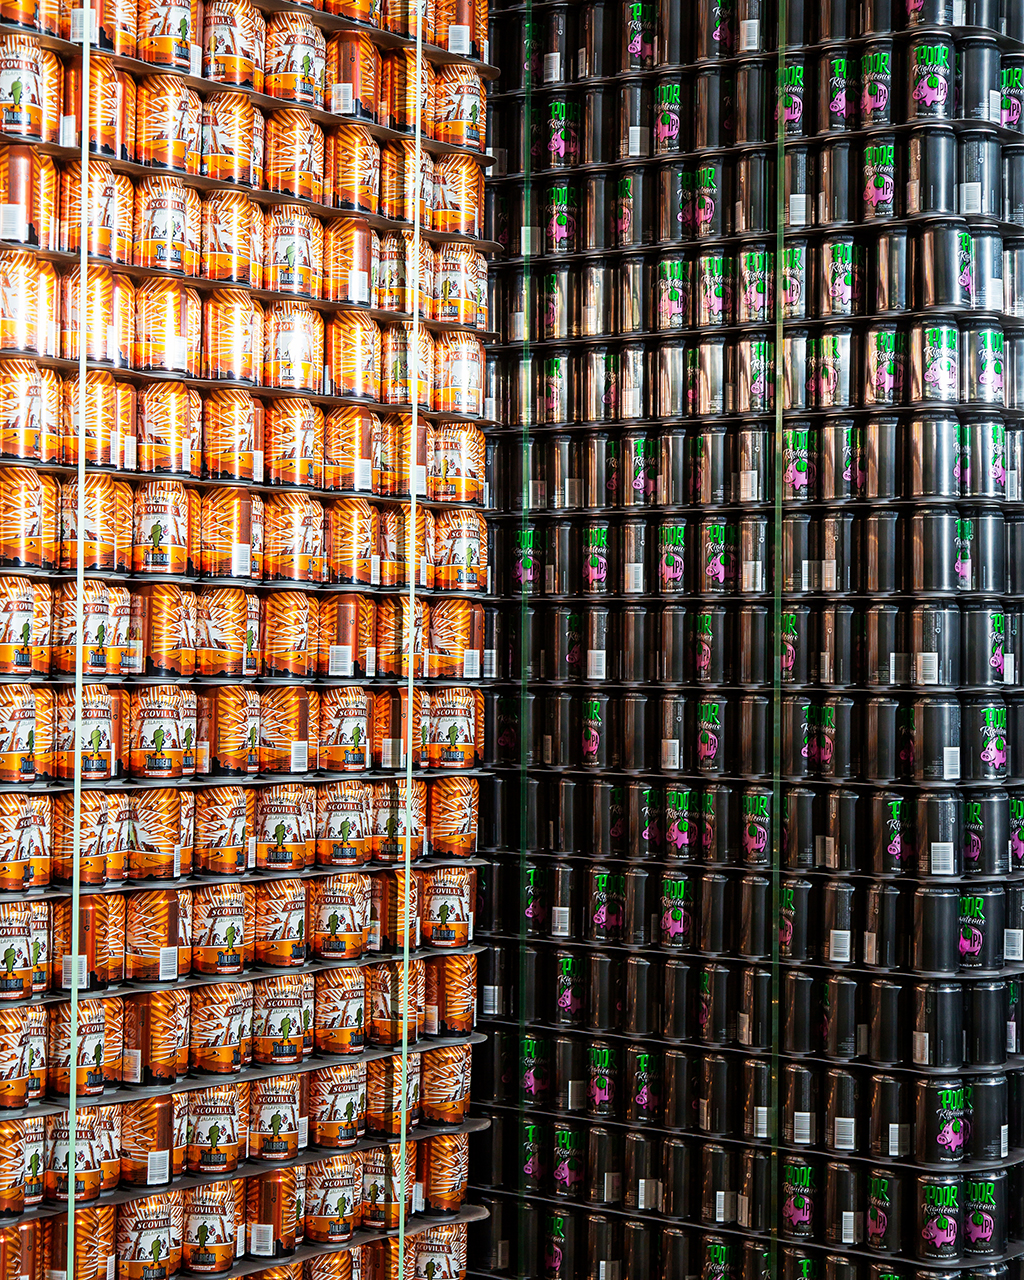 Get a behind-the-scenes look at how Jailbreak Brewing Company operates. Photograph by Scott Suchman.